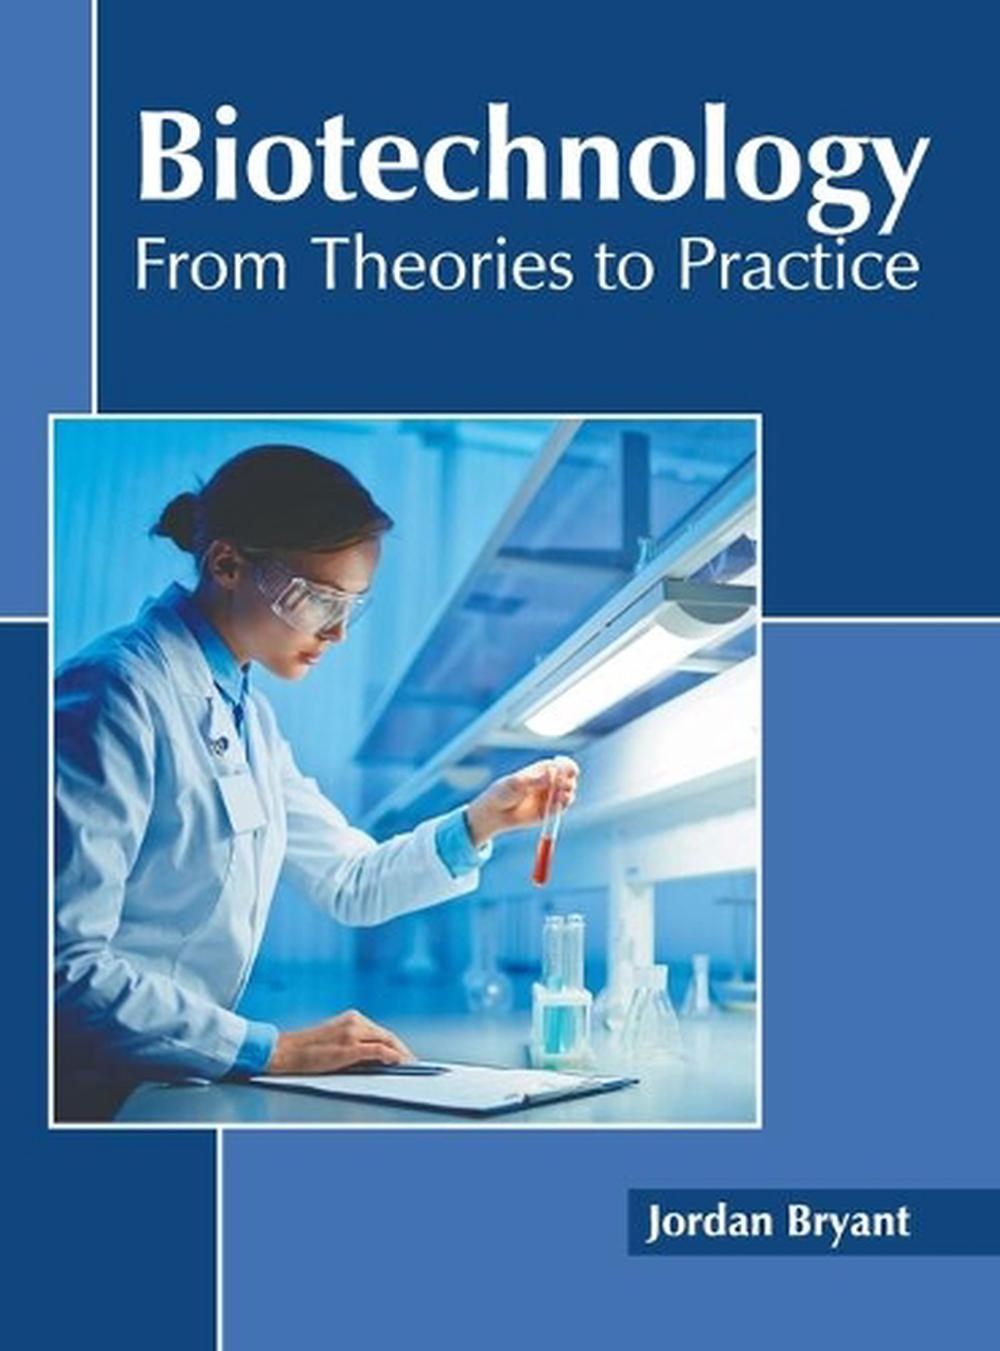 Biotechnology from Theories to Practice (English) Hardcover Book Free